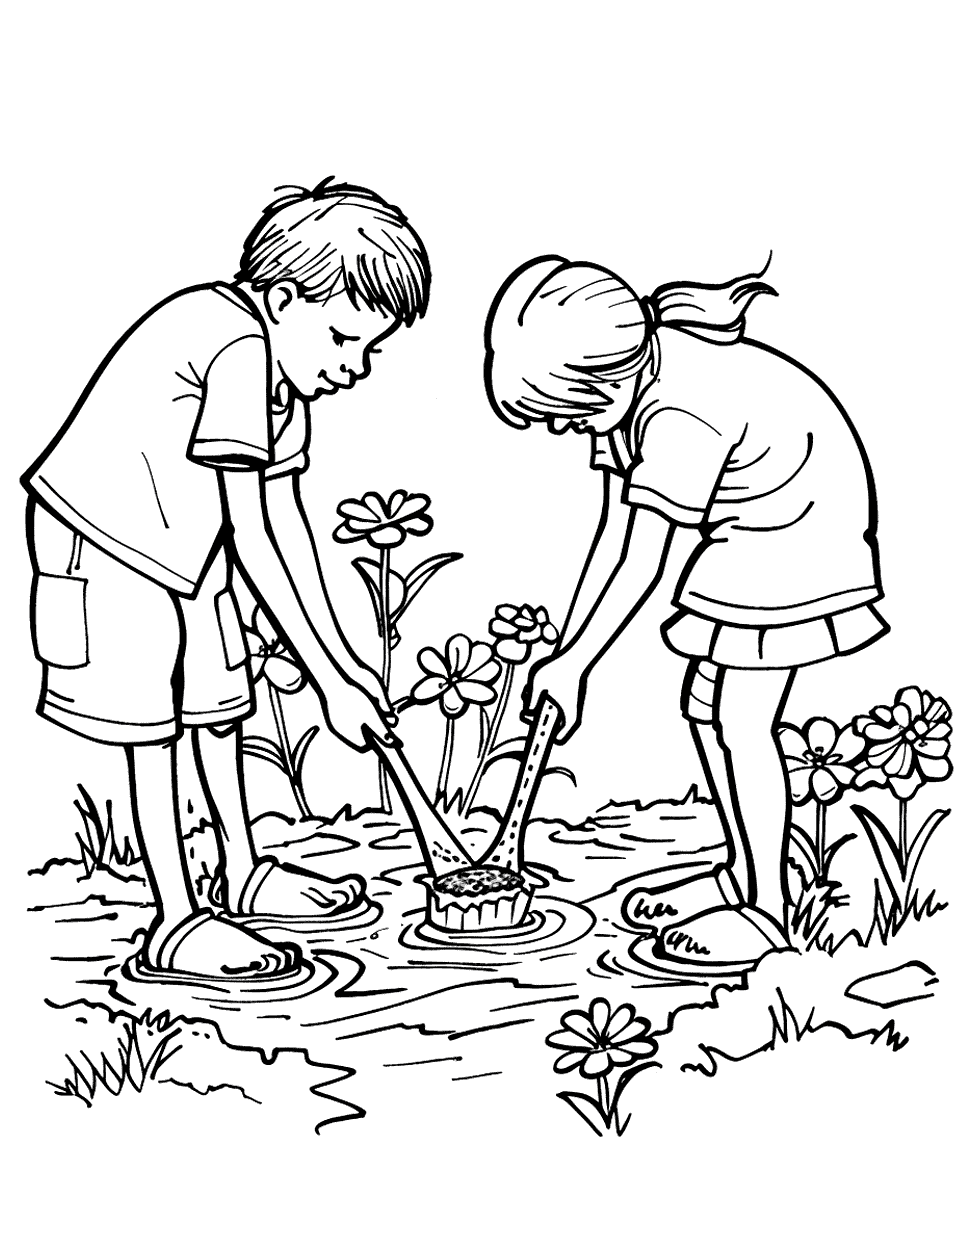 Making Mud Pies Garden Coloring Page - Children making mud pies in a muddy patch of their backyard garden.